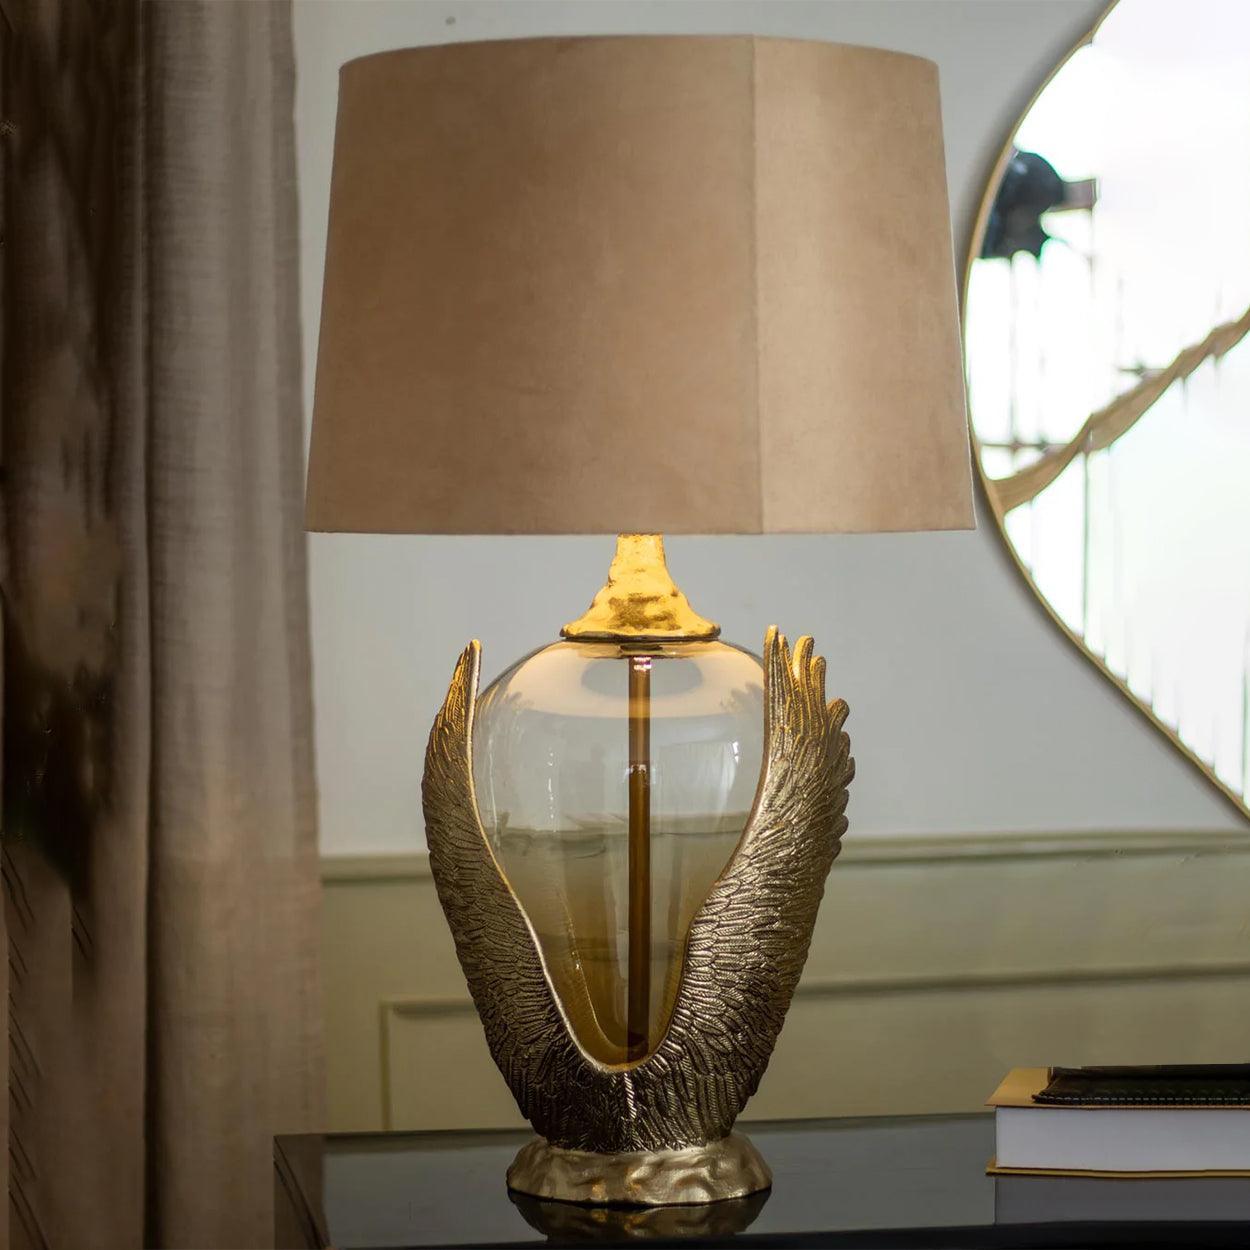 PHOENIX WING HAND MADE METAL AND GLASS TABLE LAMP - Ankur Lighting